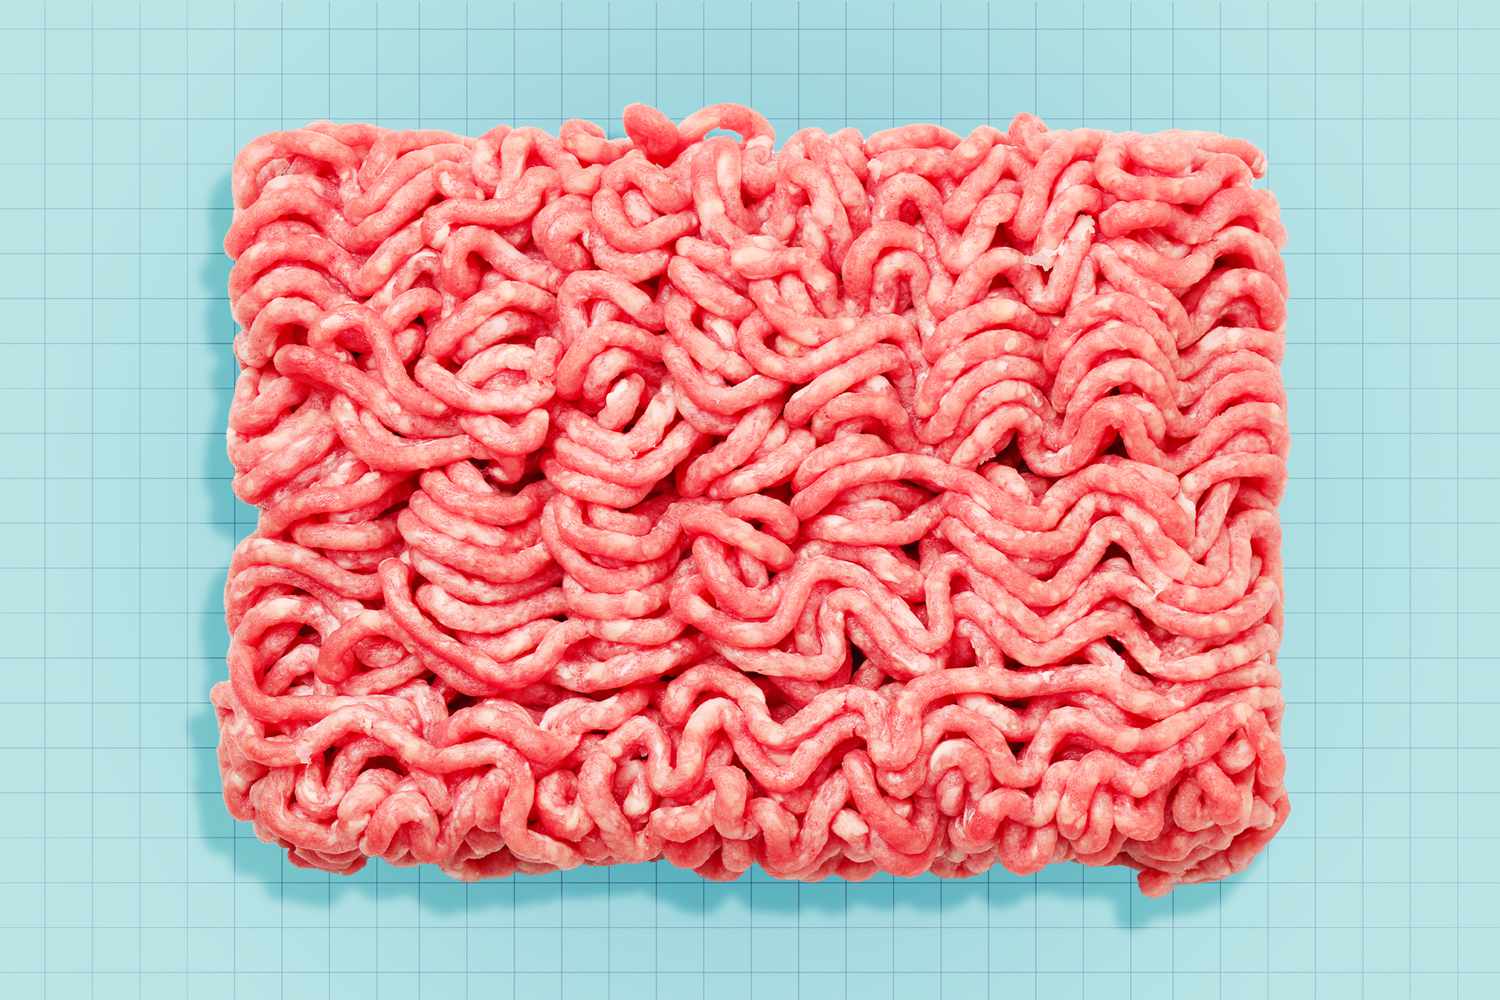 Ground beef on a designed background